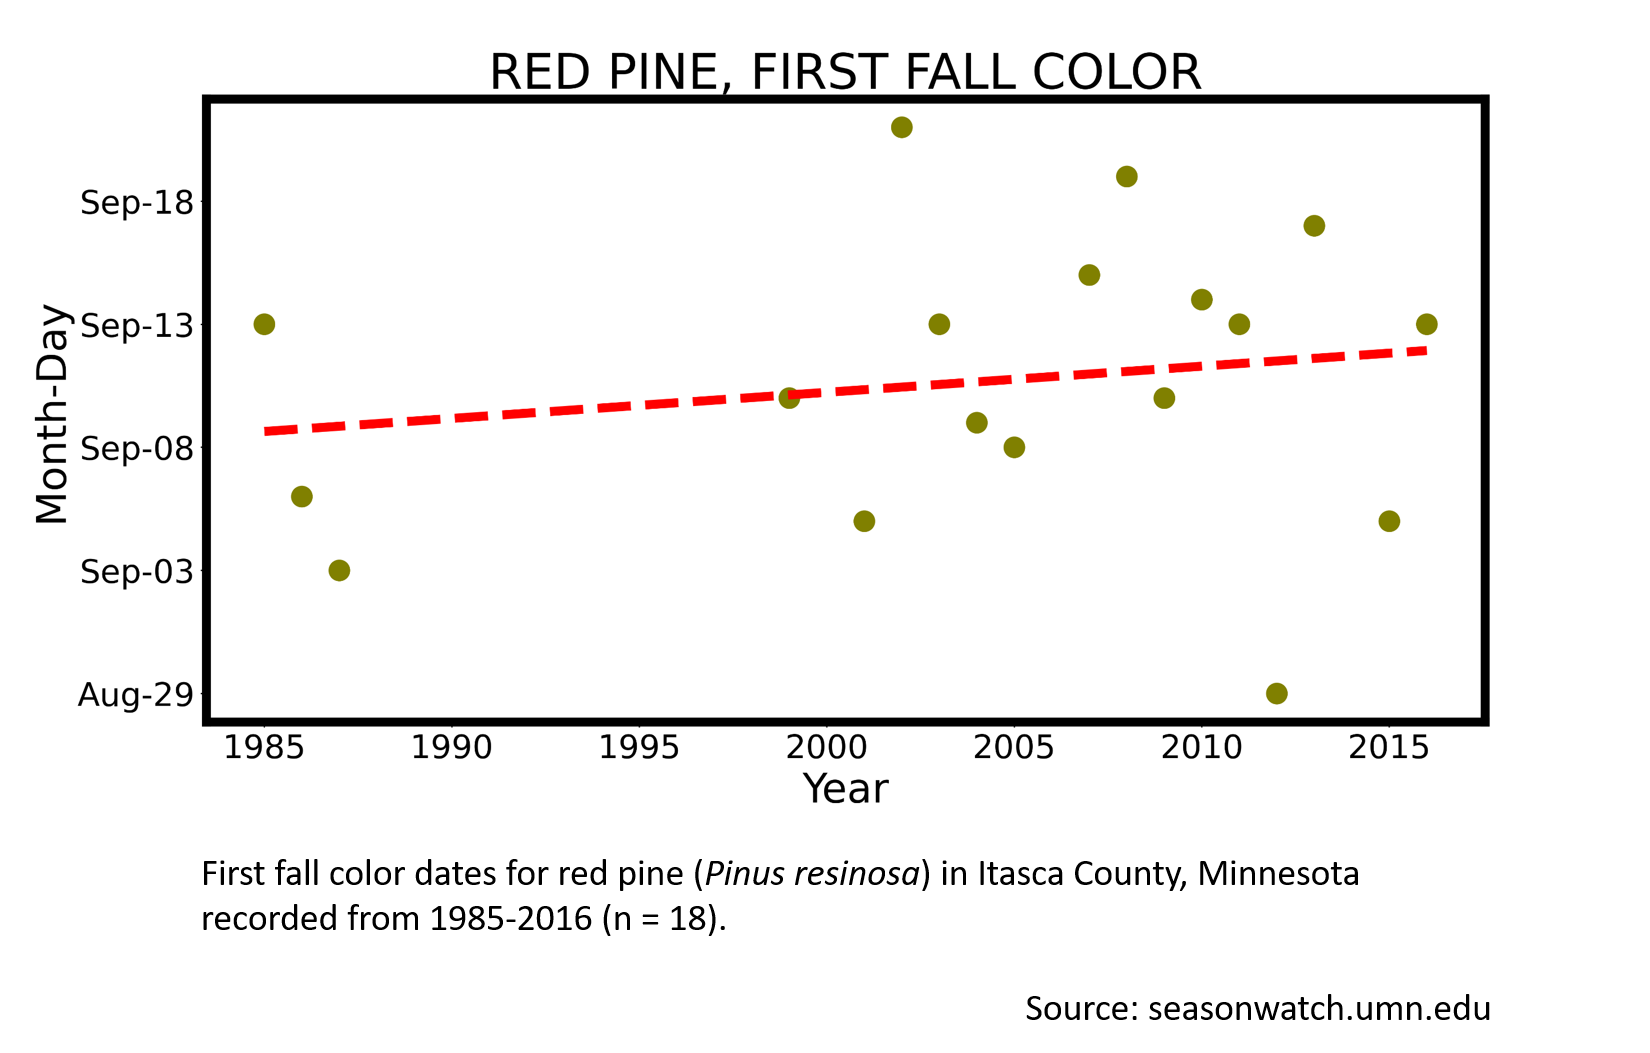 Scatterplot showing red pine phenology observations in Itasca County, Minnesota